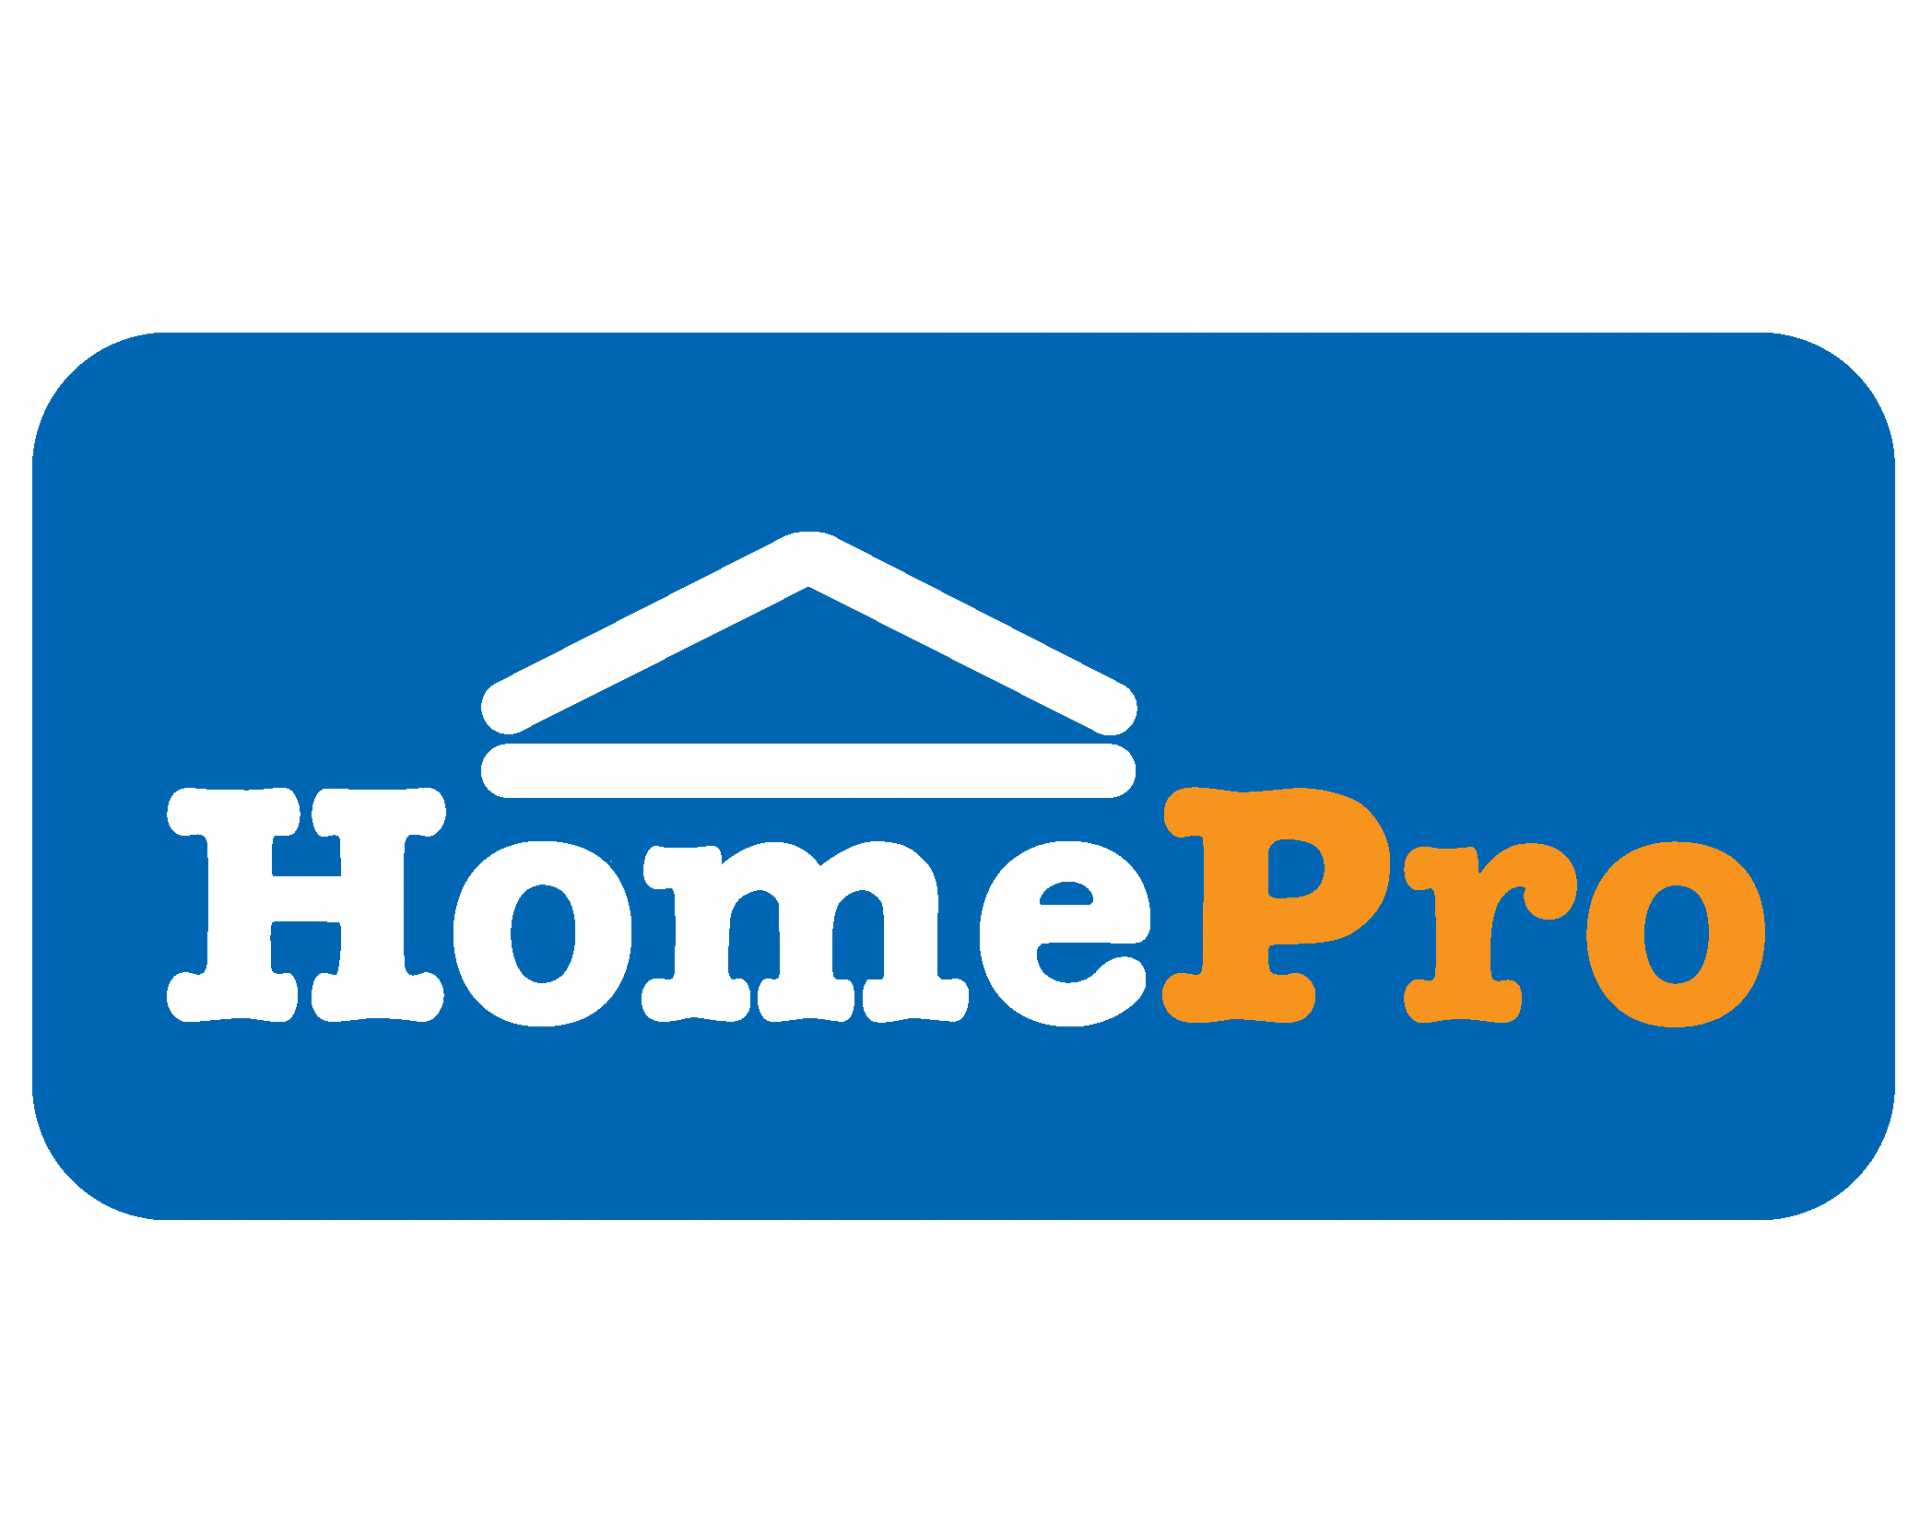 home-pro-logo-01.png